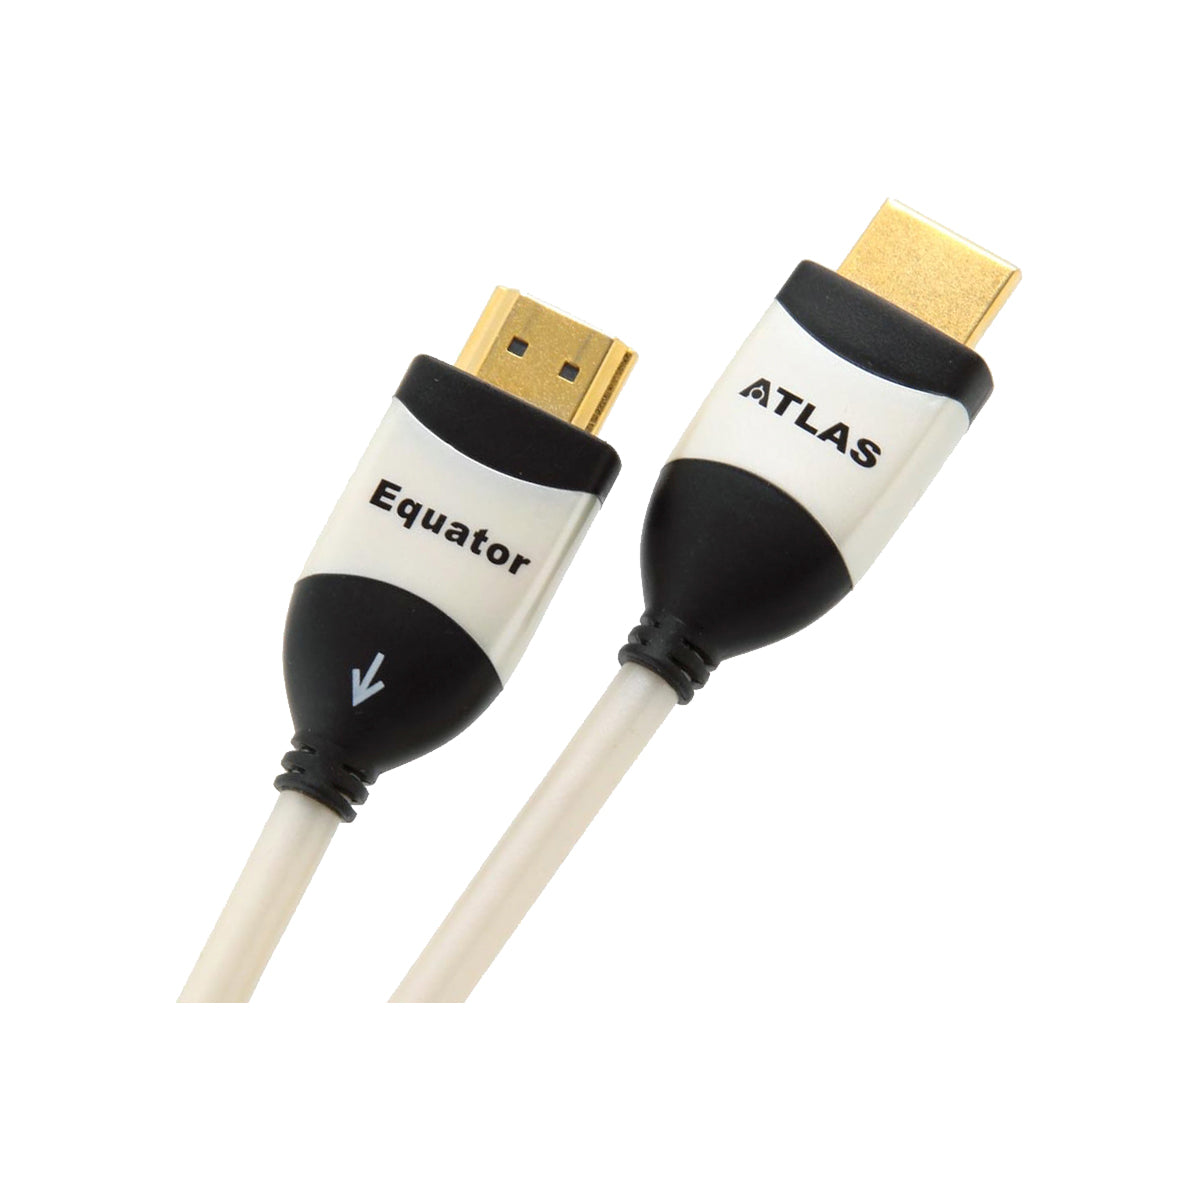 Atlas Equator HDMI Active Cable 1.0 mt at Audio Influence